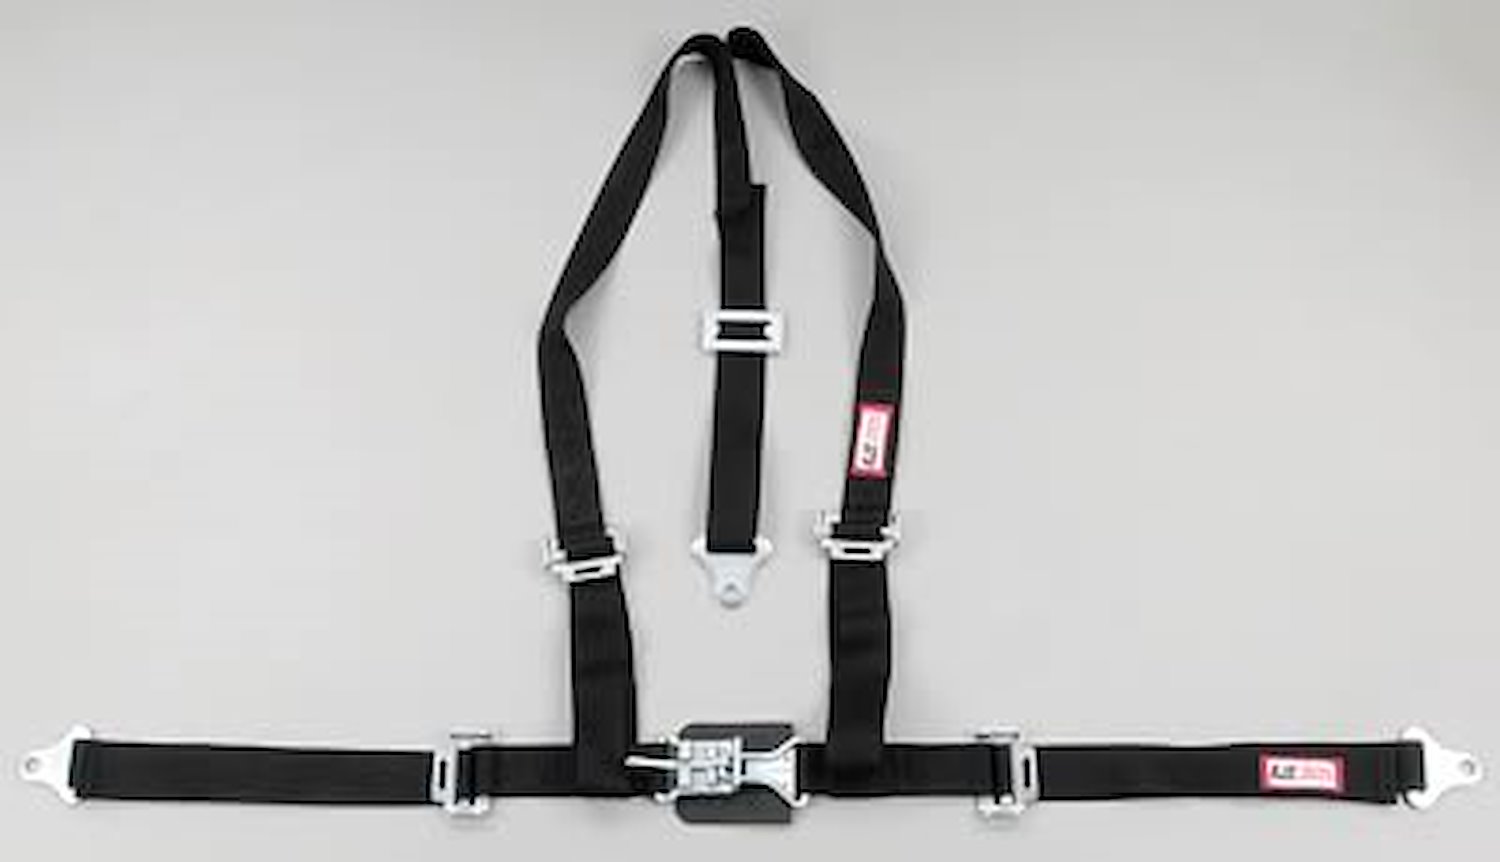 NON-SFI L&L HARNESS 2 PULL DOWN Lap Belt SNAP SEWN IN 2 S.H. Y FLOOR Mount w/STERNUM STRAP WRAP/BOLT YELLOW